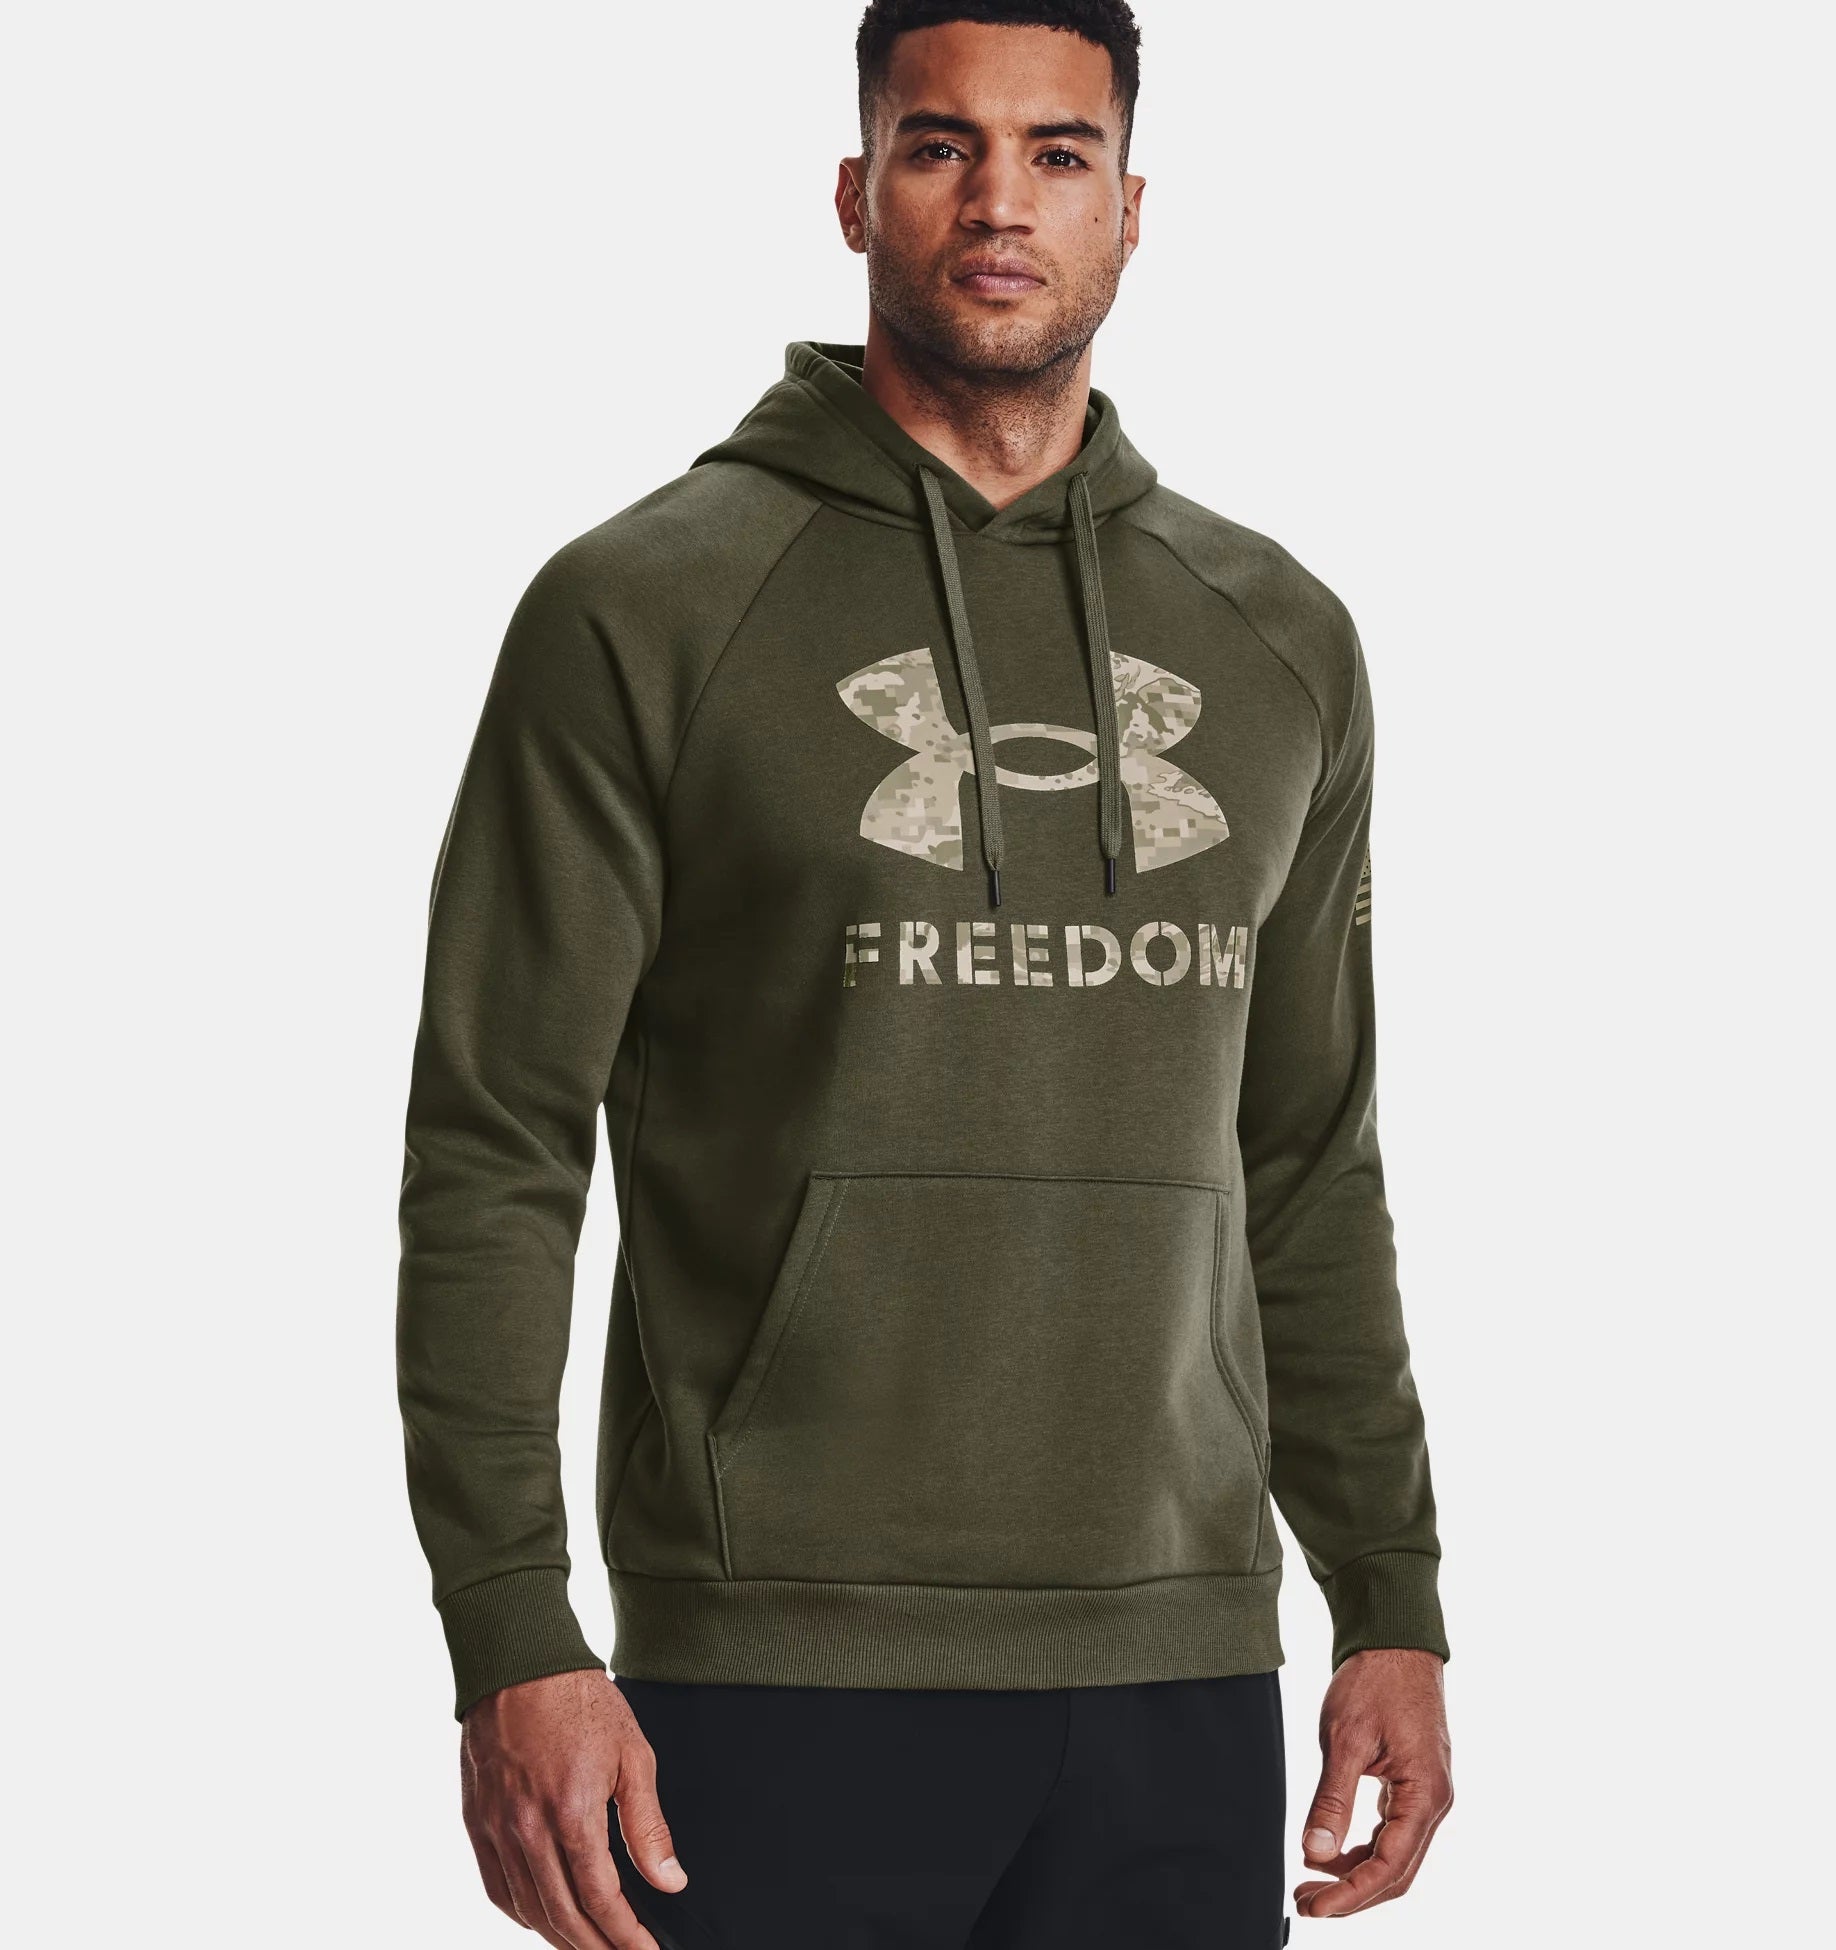 Under Armour All Day Fleece Wyoming Hoodie